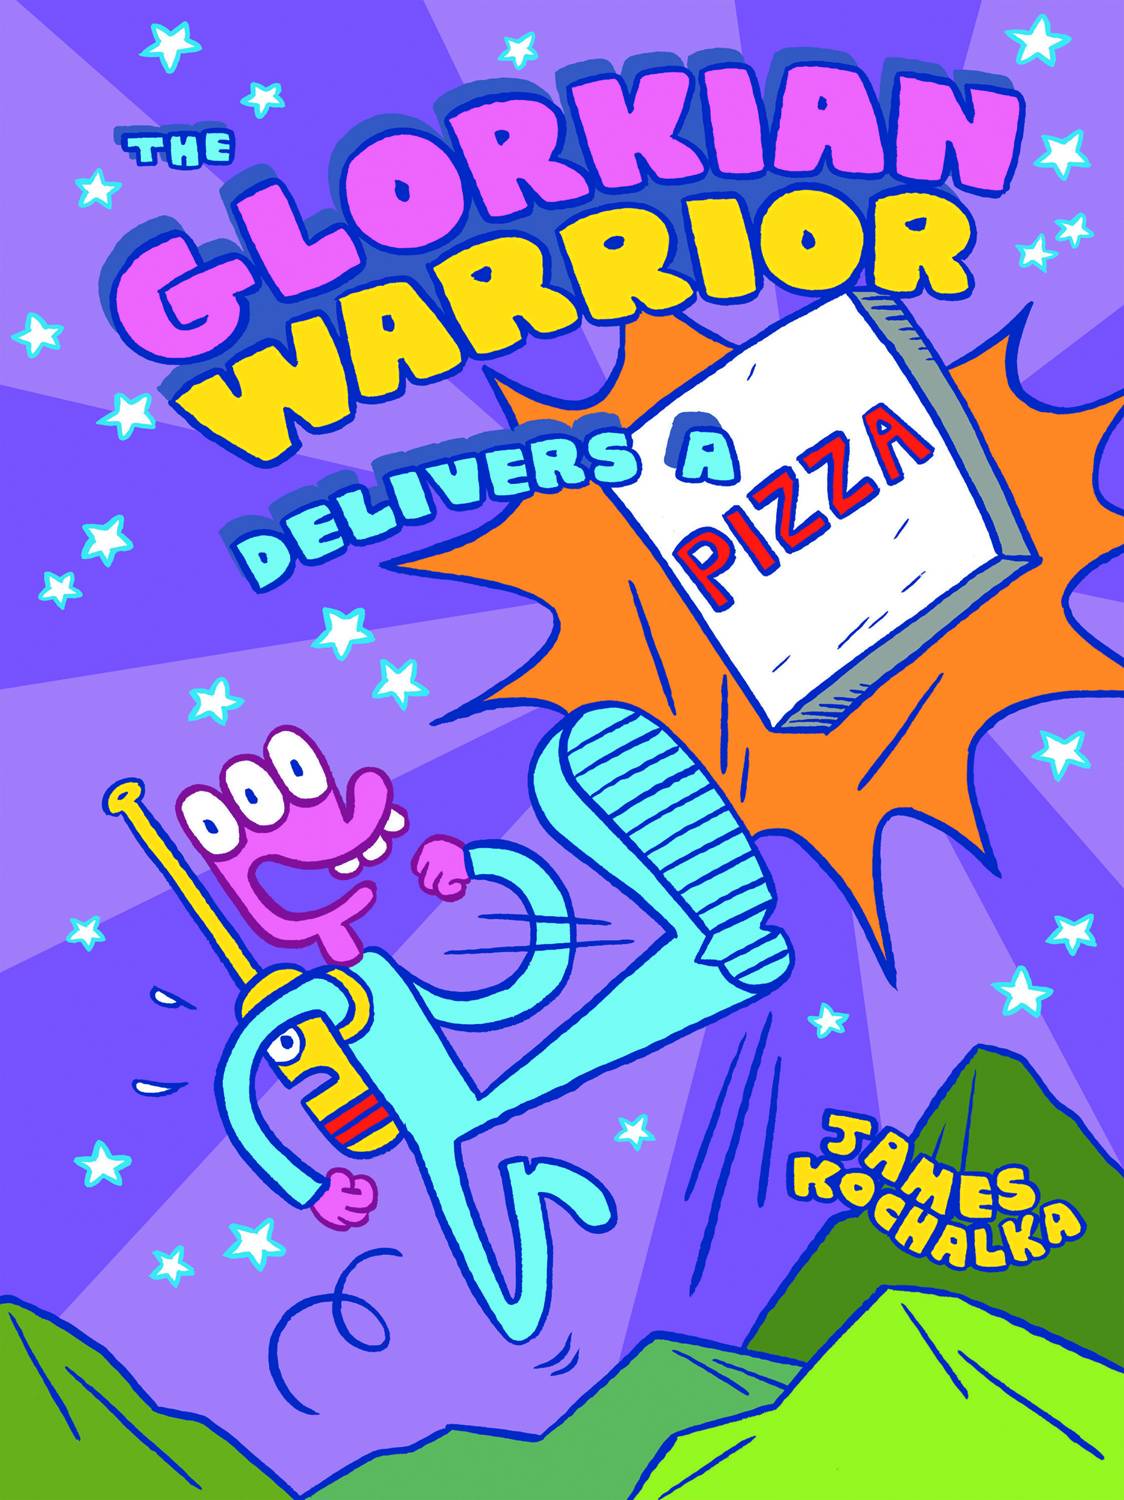 Glorkian Warrior Graphic Novel Volume 1 Delivers A Pizza